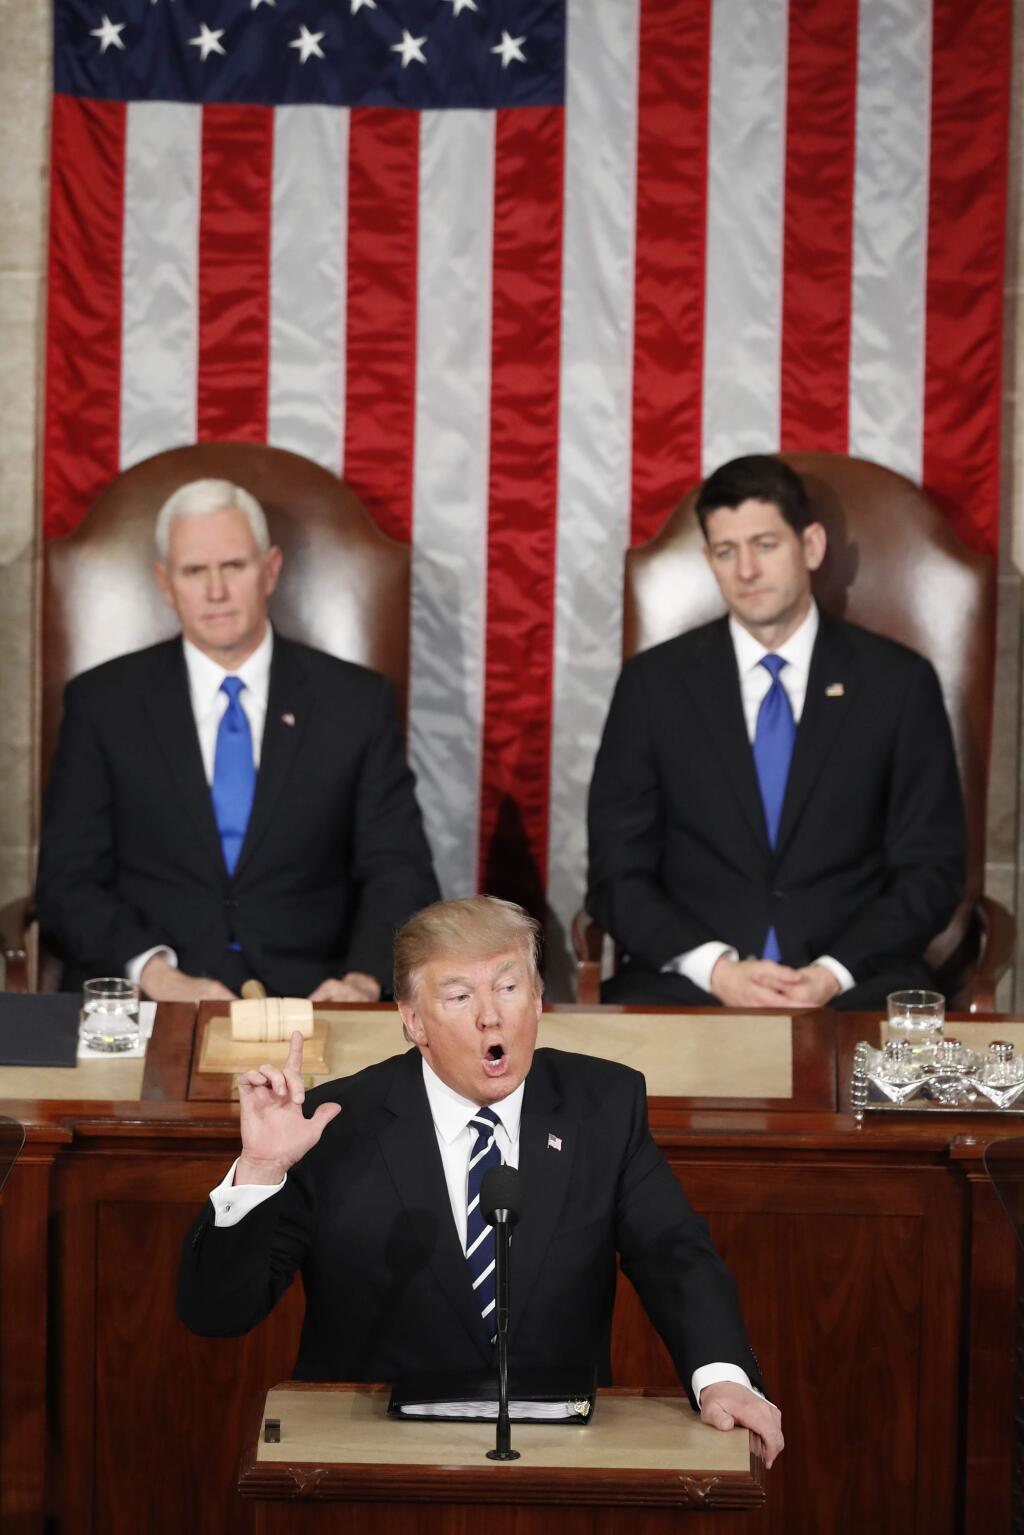 President Donald Trump, flanked by Vice President Mike Pence and House Speaker Paul Ryan of Wis. gestures as he addresses a joint session of Congress on Capitol Hill in Washington, Tuesday, Feb. 28, 2017. (AP Photo/Alex Brandon)